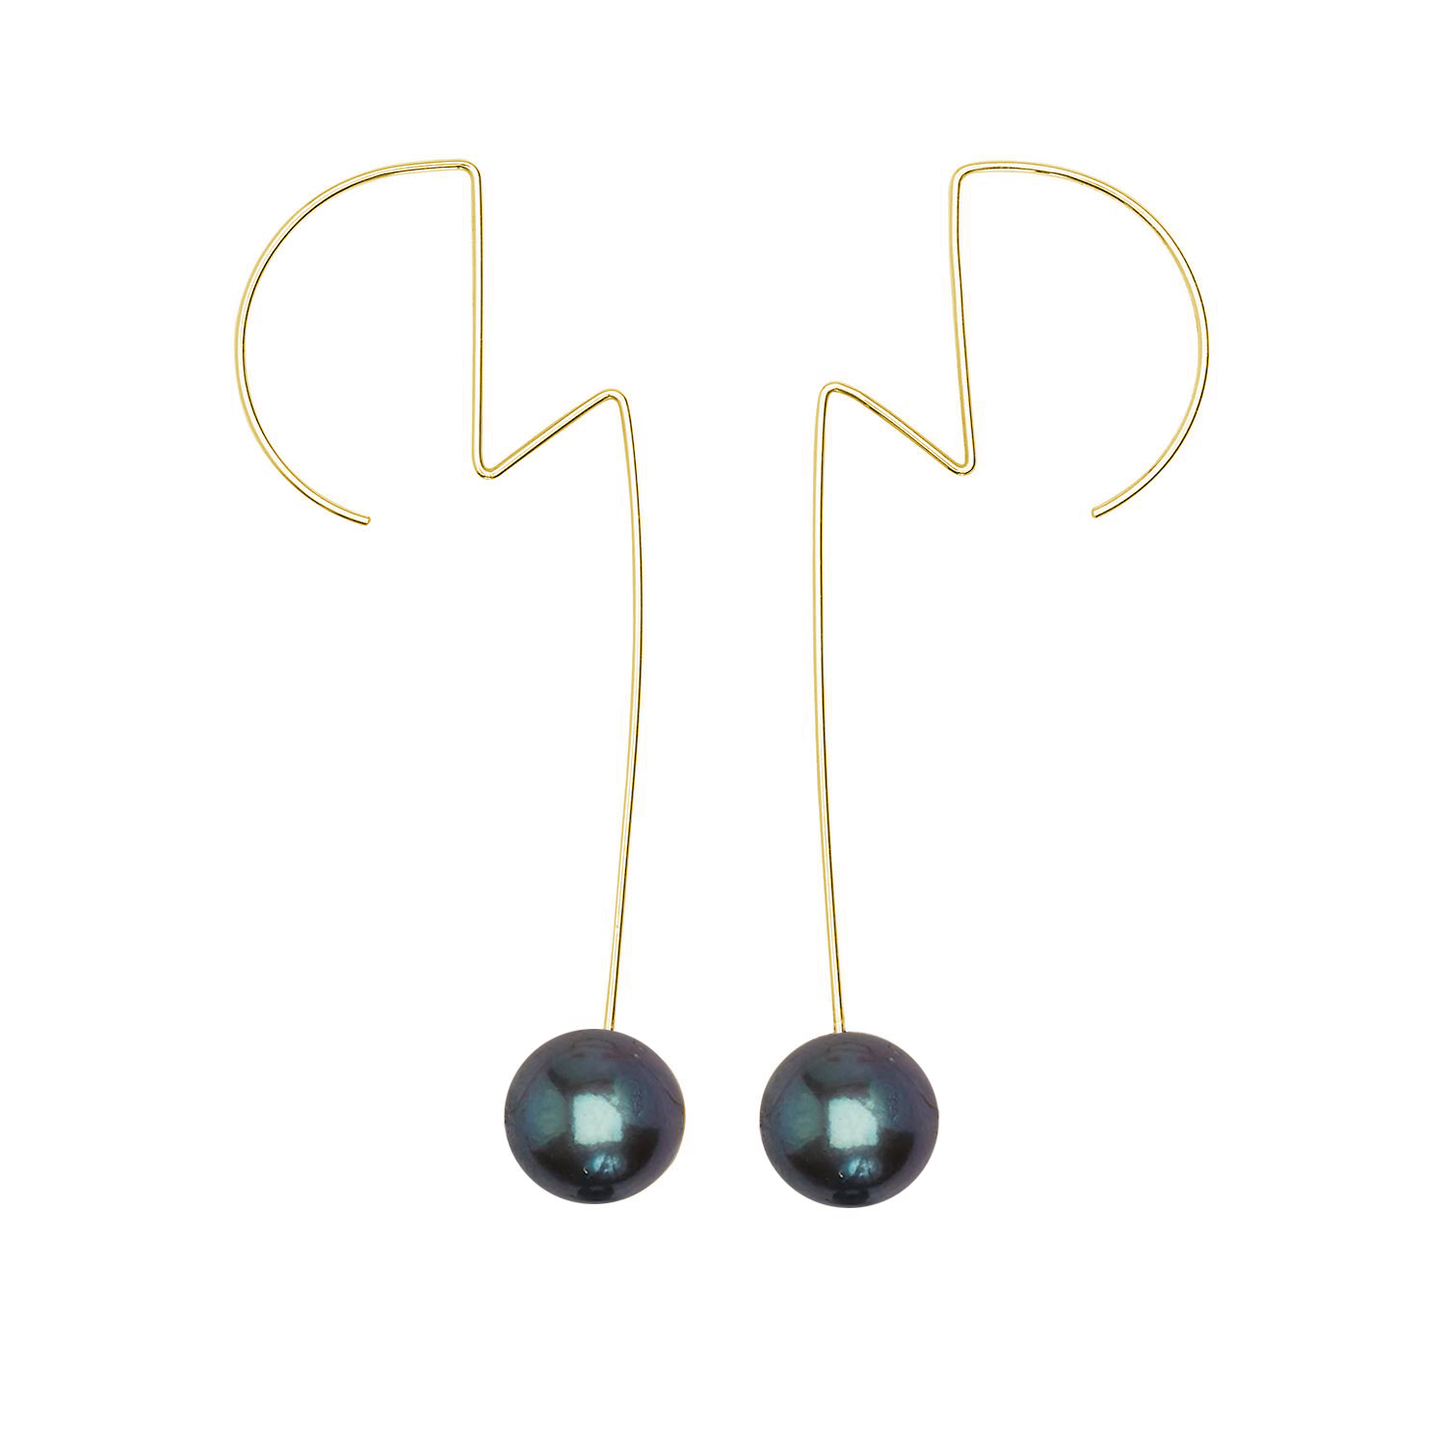 Ziggy Stardust inspired Earrings with Large Freshwater Pearls (9mm)